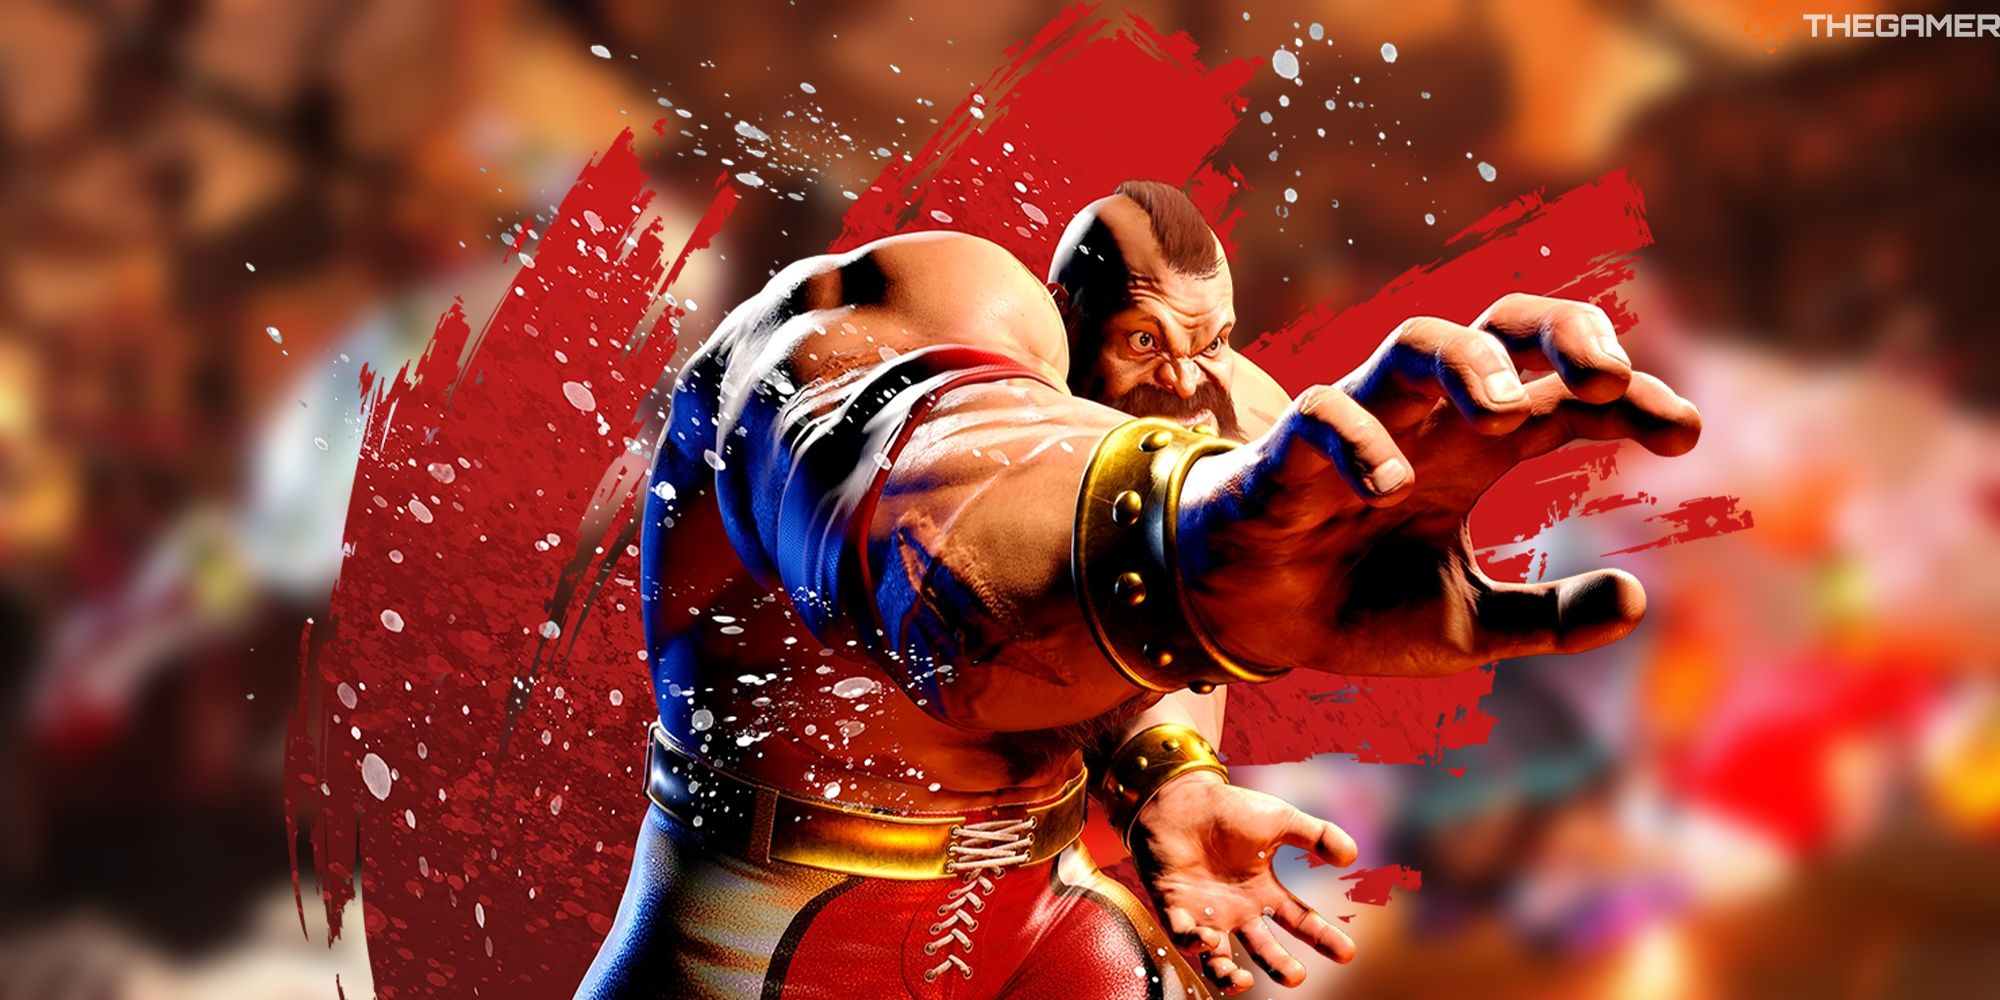 Zangief crouches forward, ready to grapple, while in front of a backdrop of blurred screenshots from Street Fighter 6.